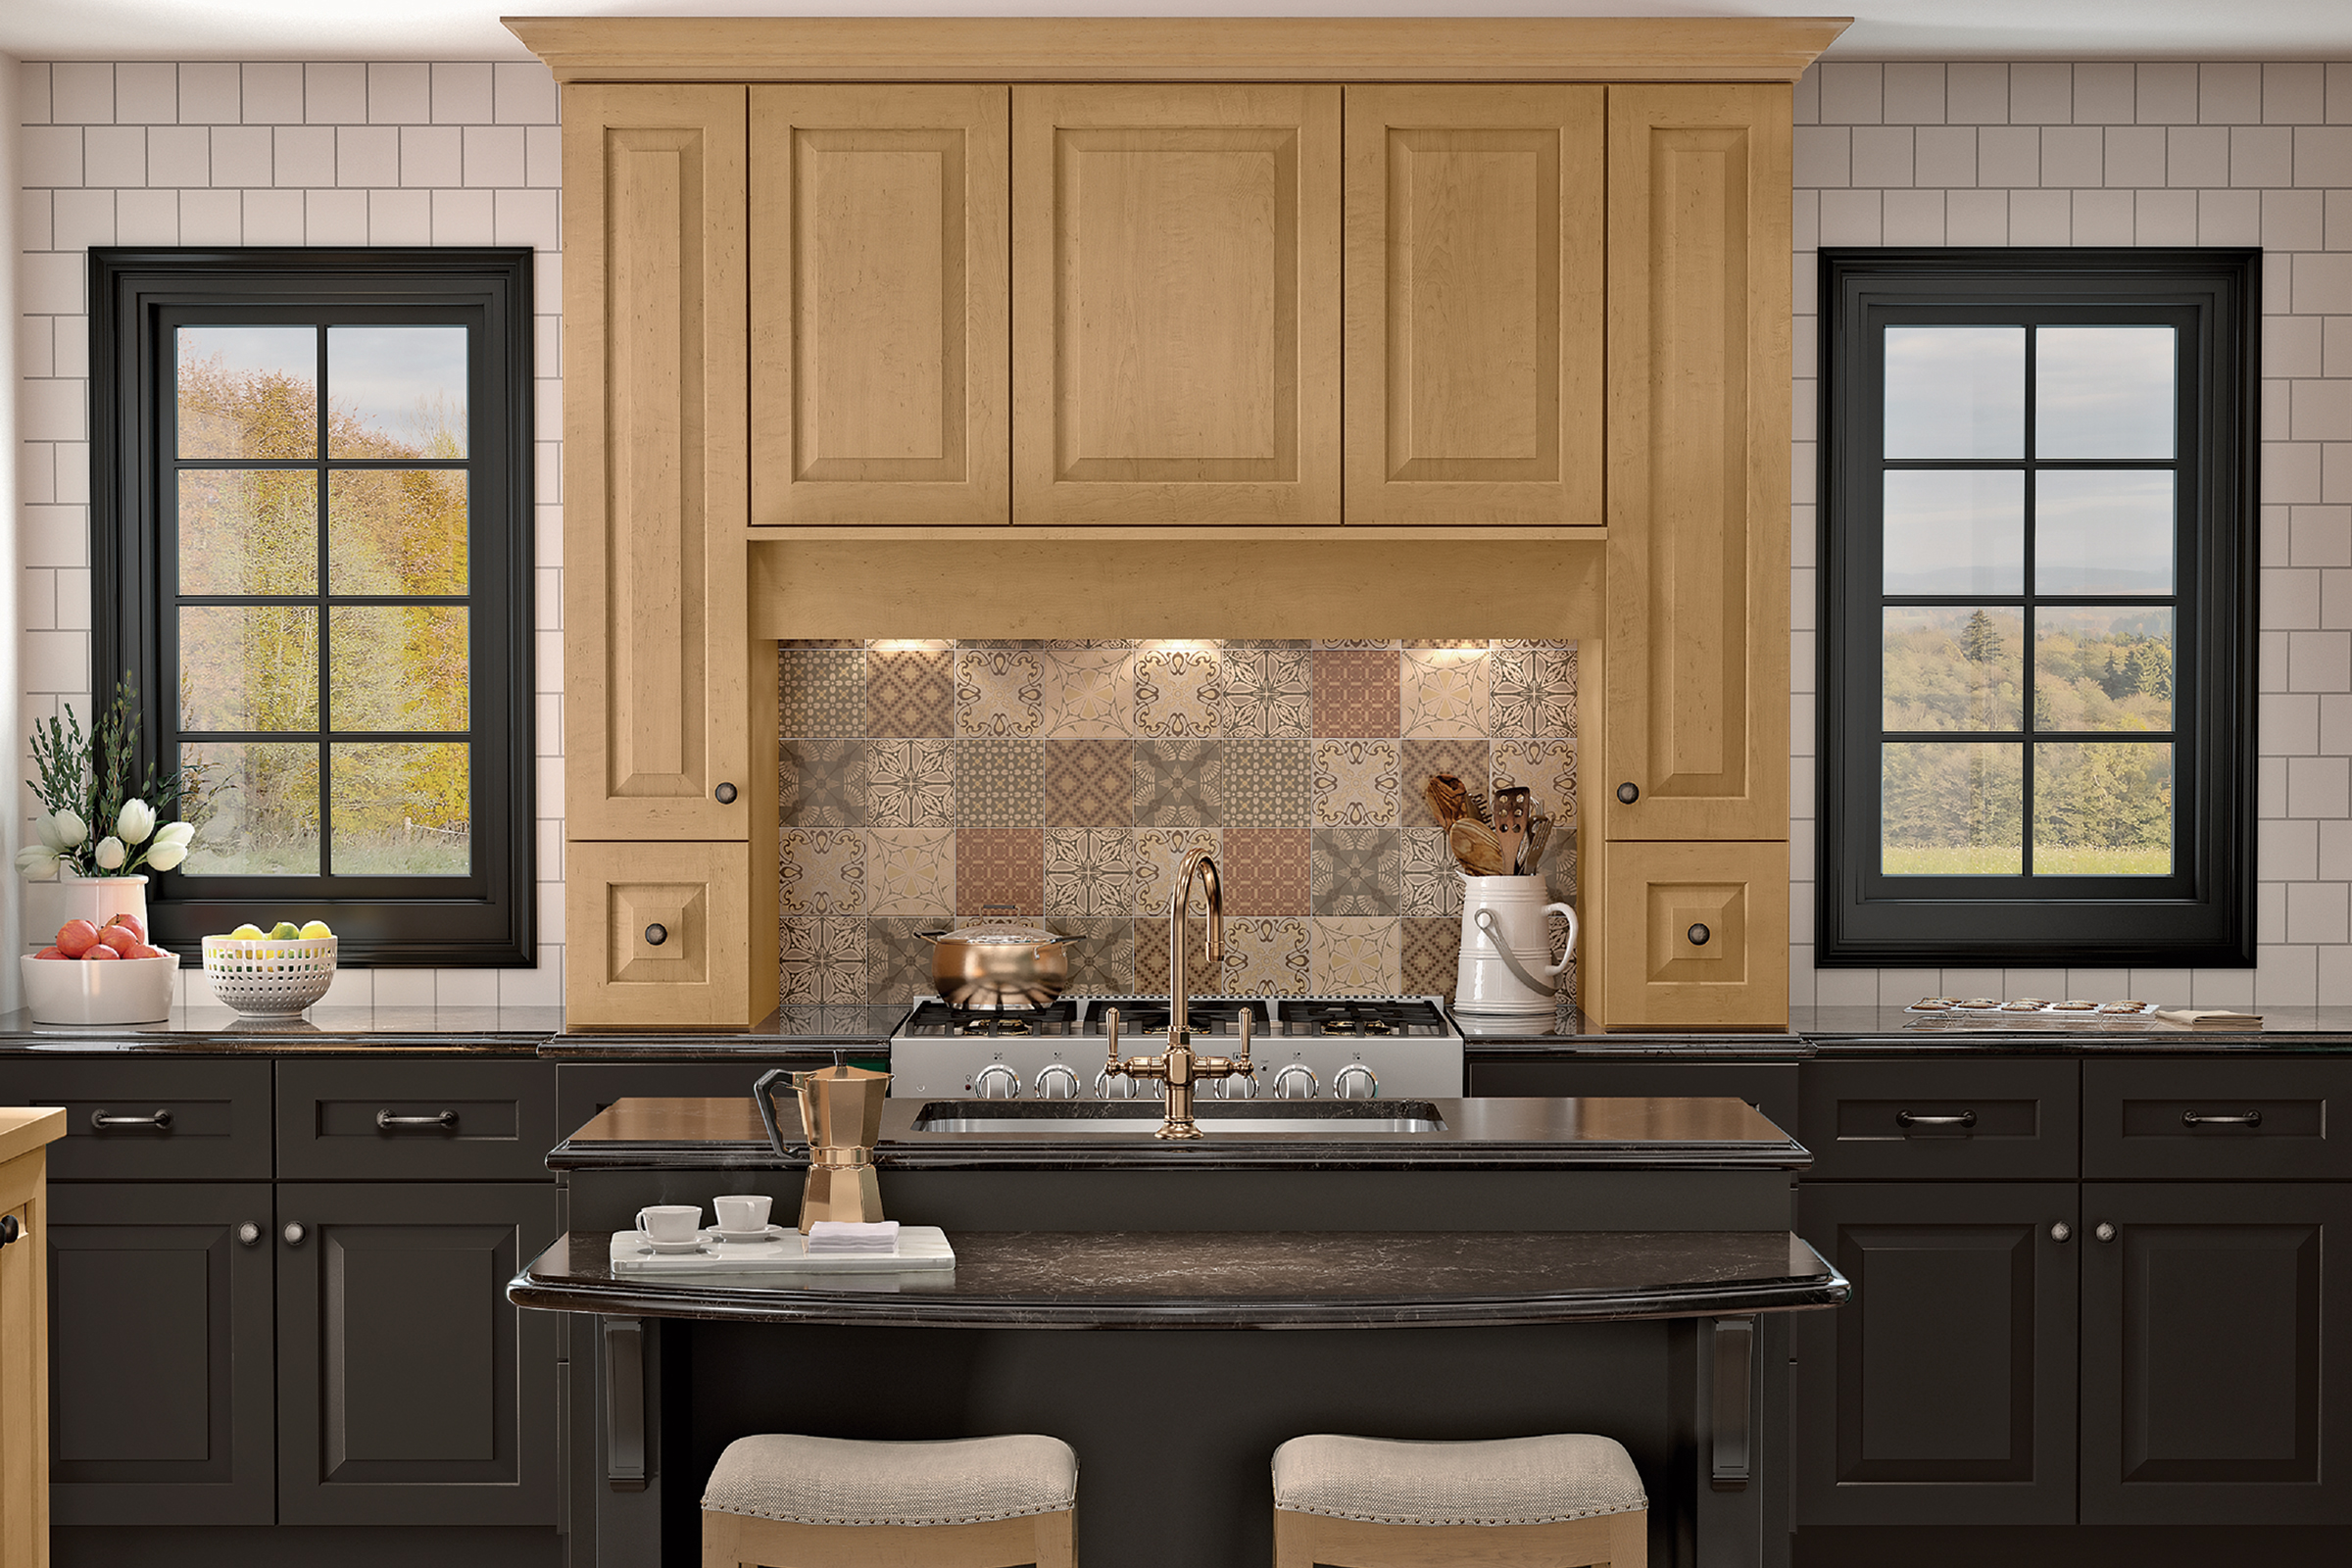 Top-Five Most Popular Kitchen Cabinet Stain Colors in 2022 - KraftMaid